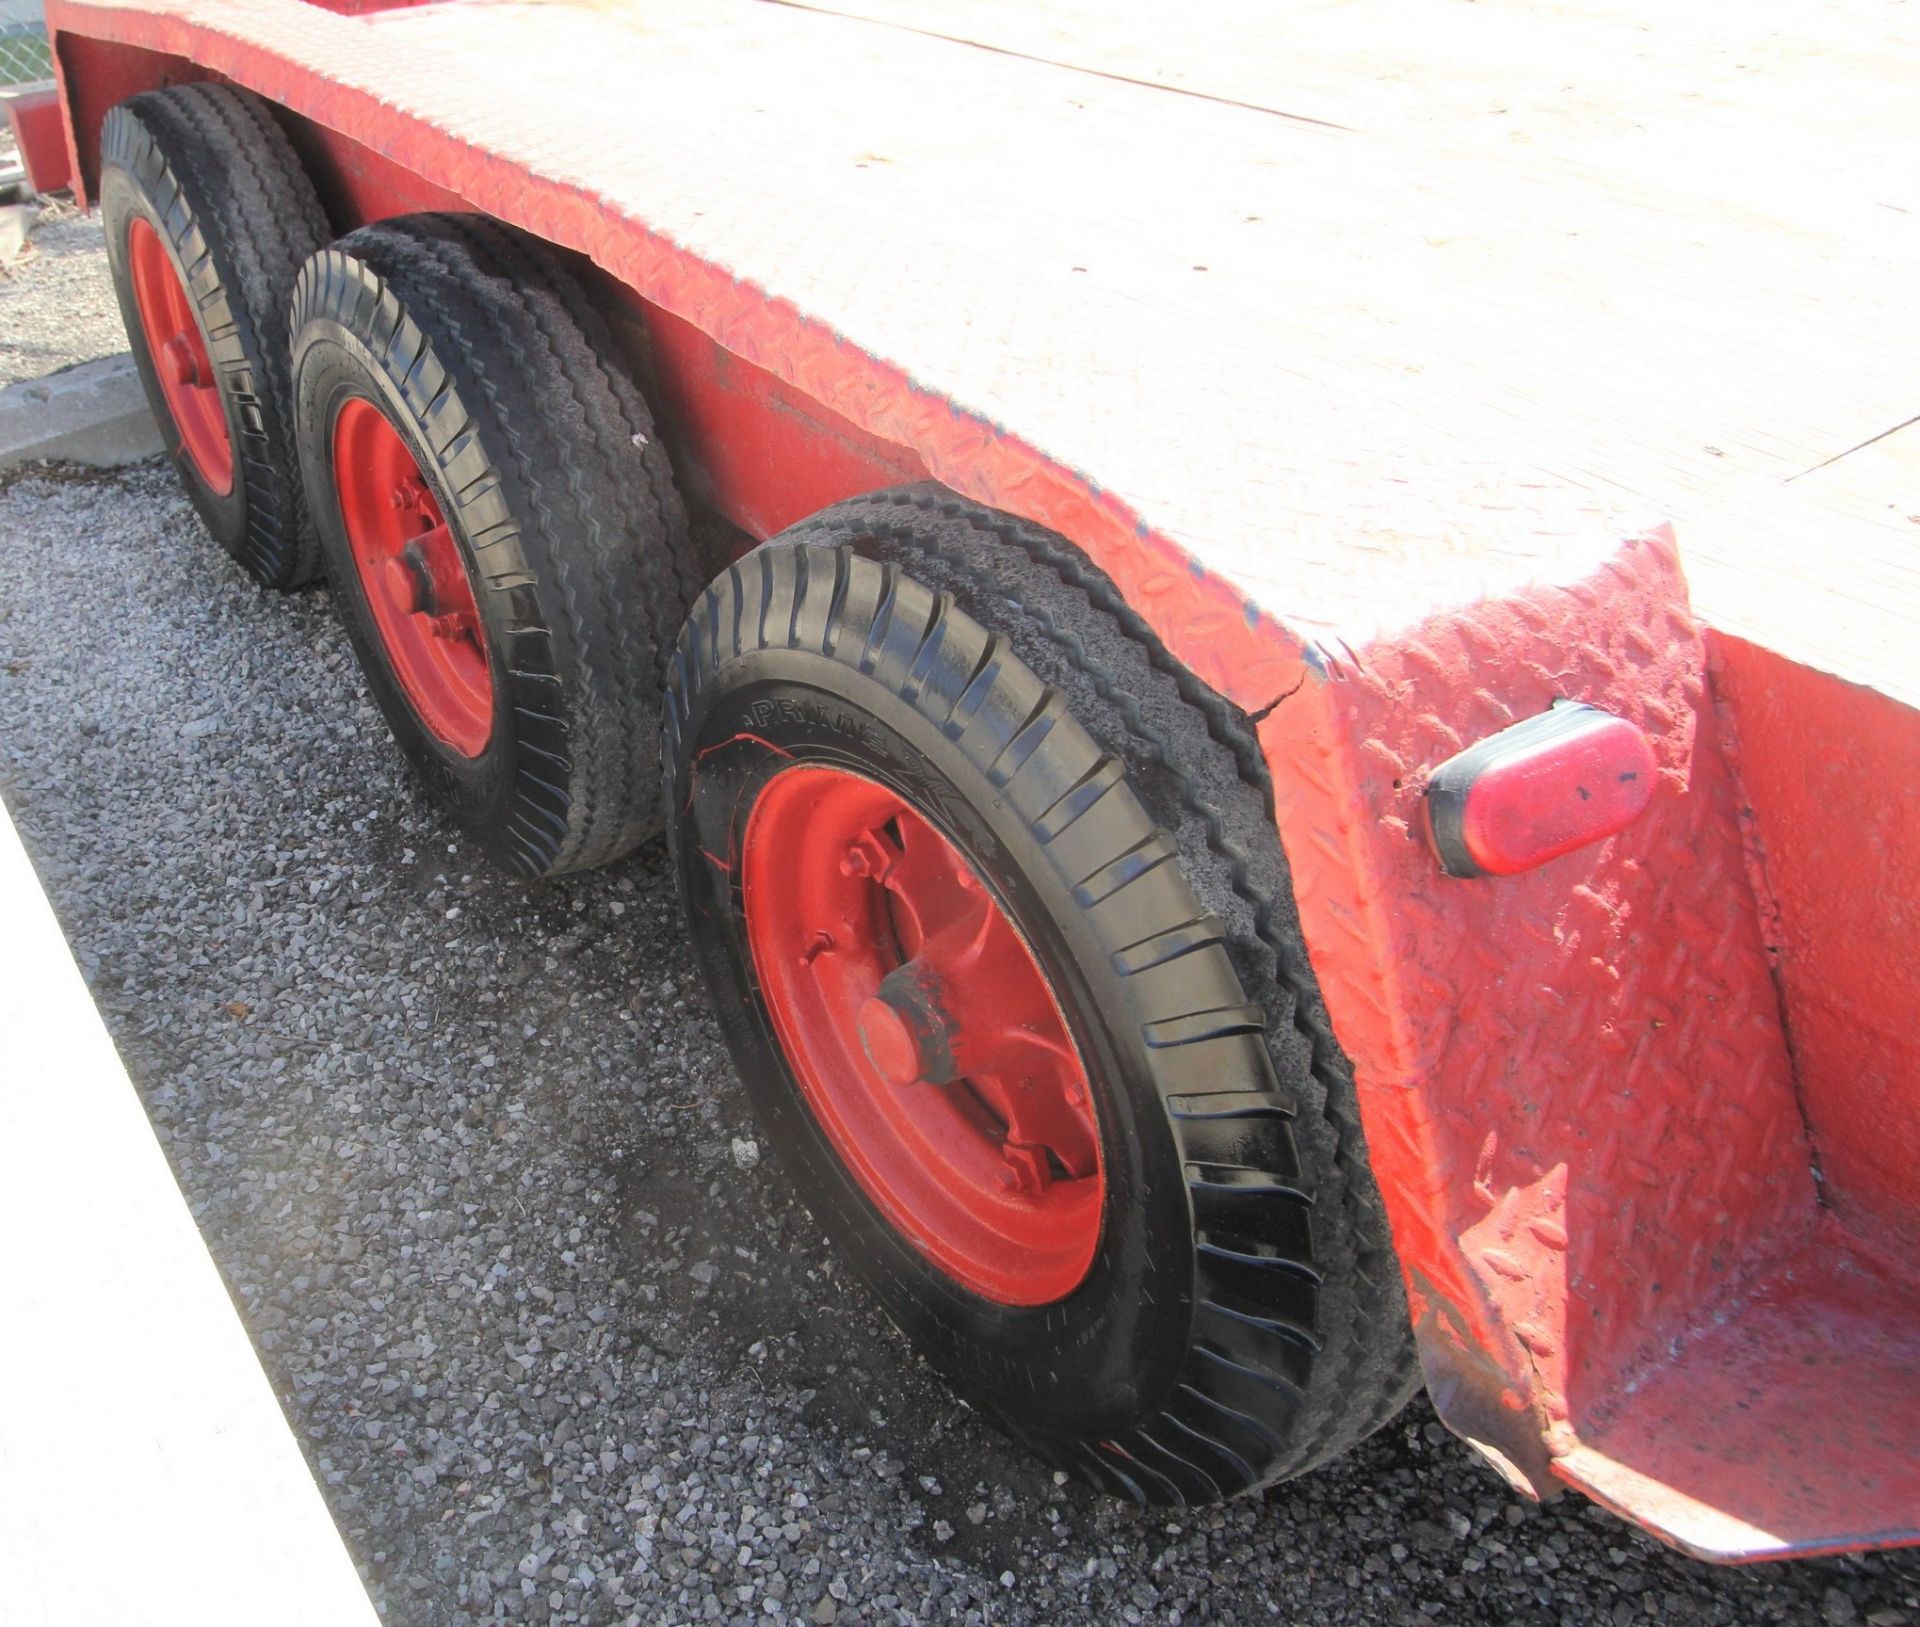 J.C. TRAILERS 18' TRI-AXLE EQUIPMENT TRAILER, 18,000 LBS. MAX CAPACITY, WOOD DECK, SPRING - Image 5 of 8